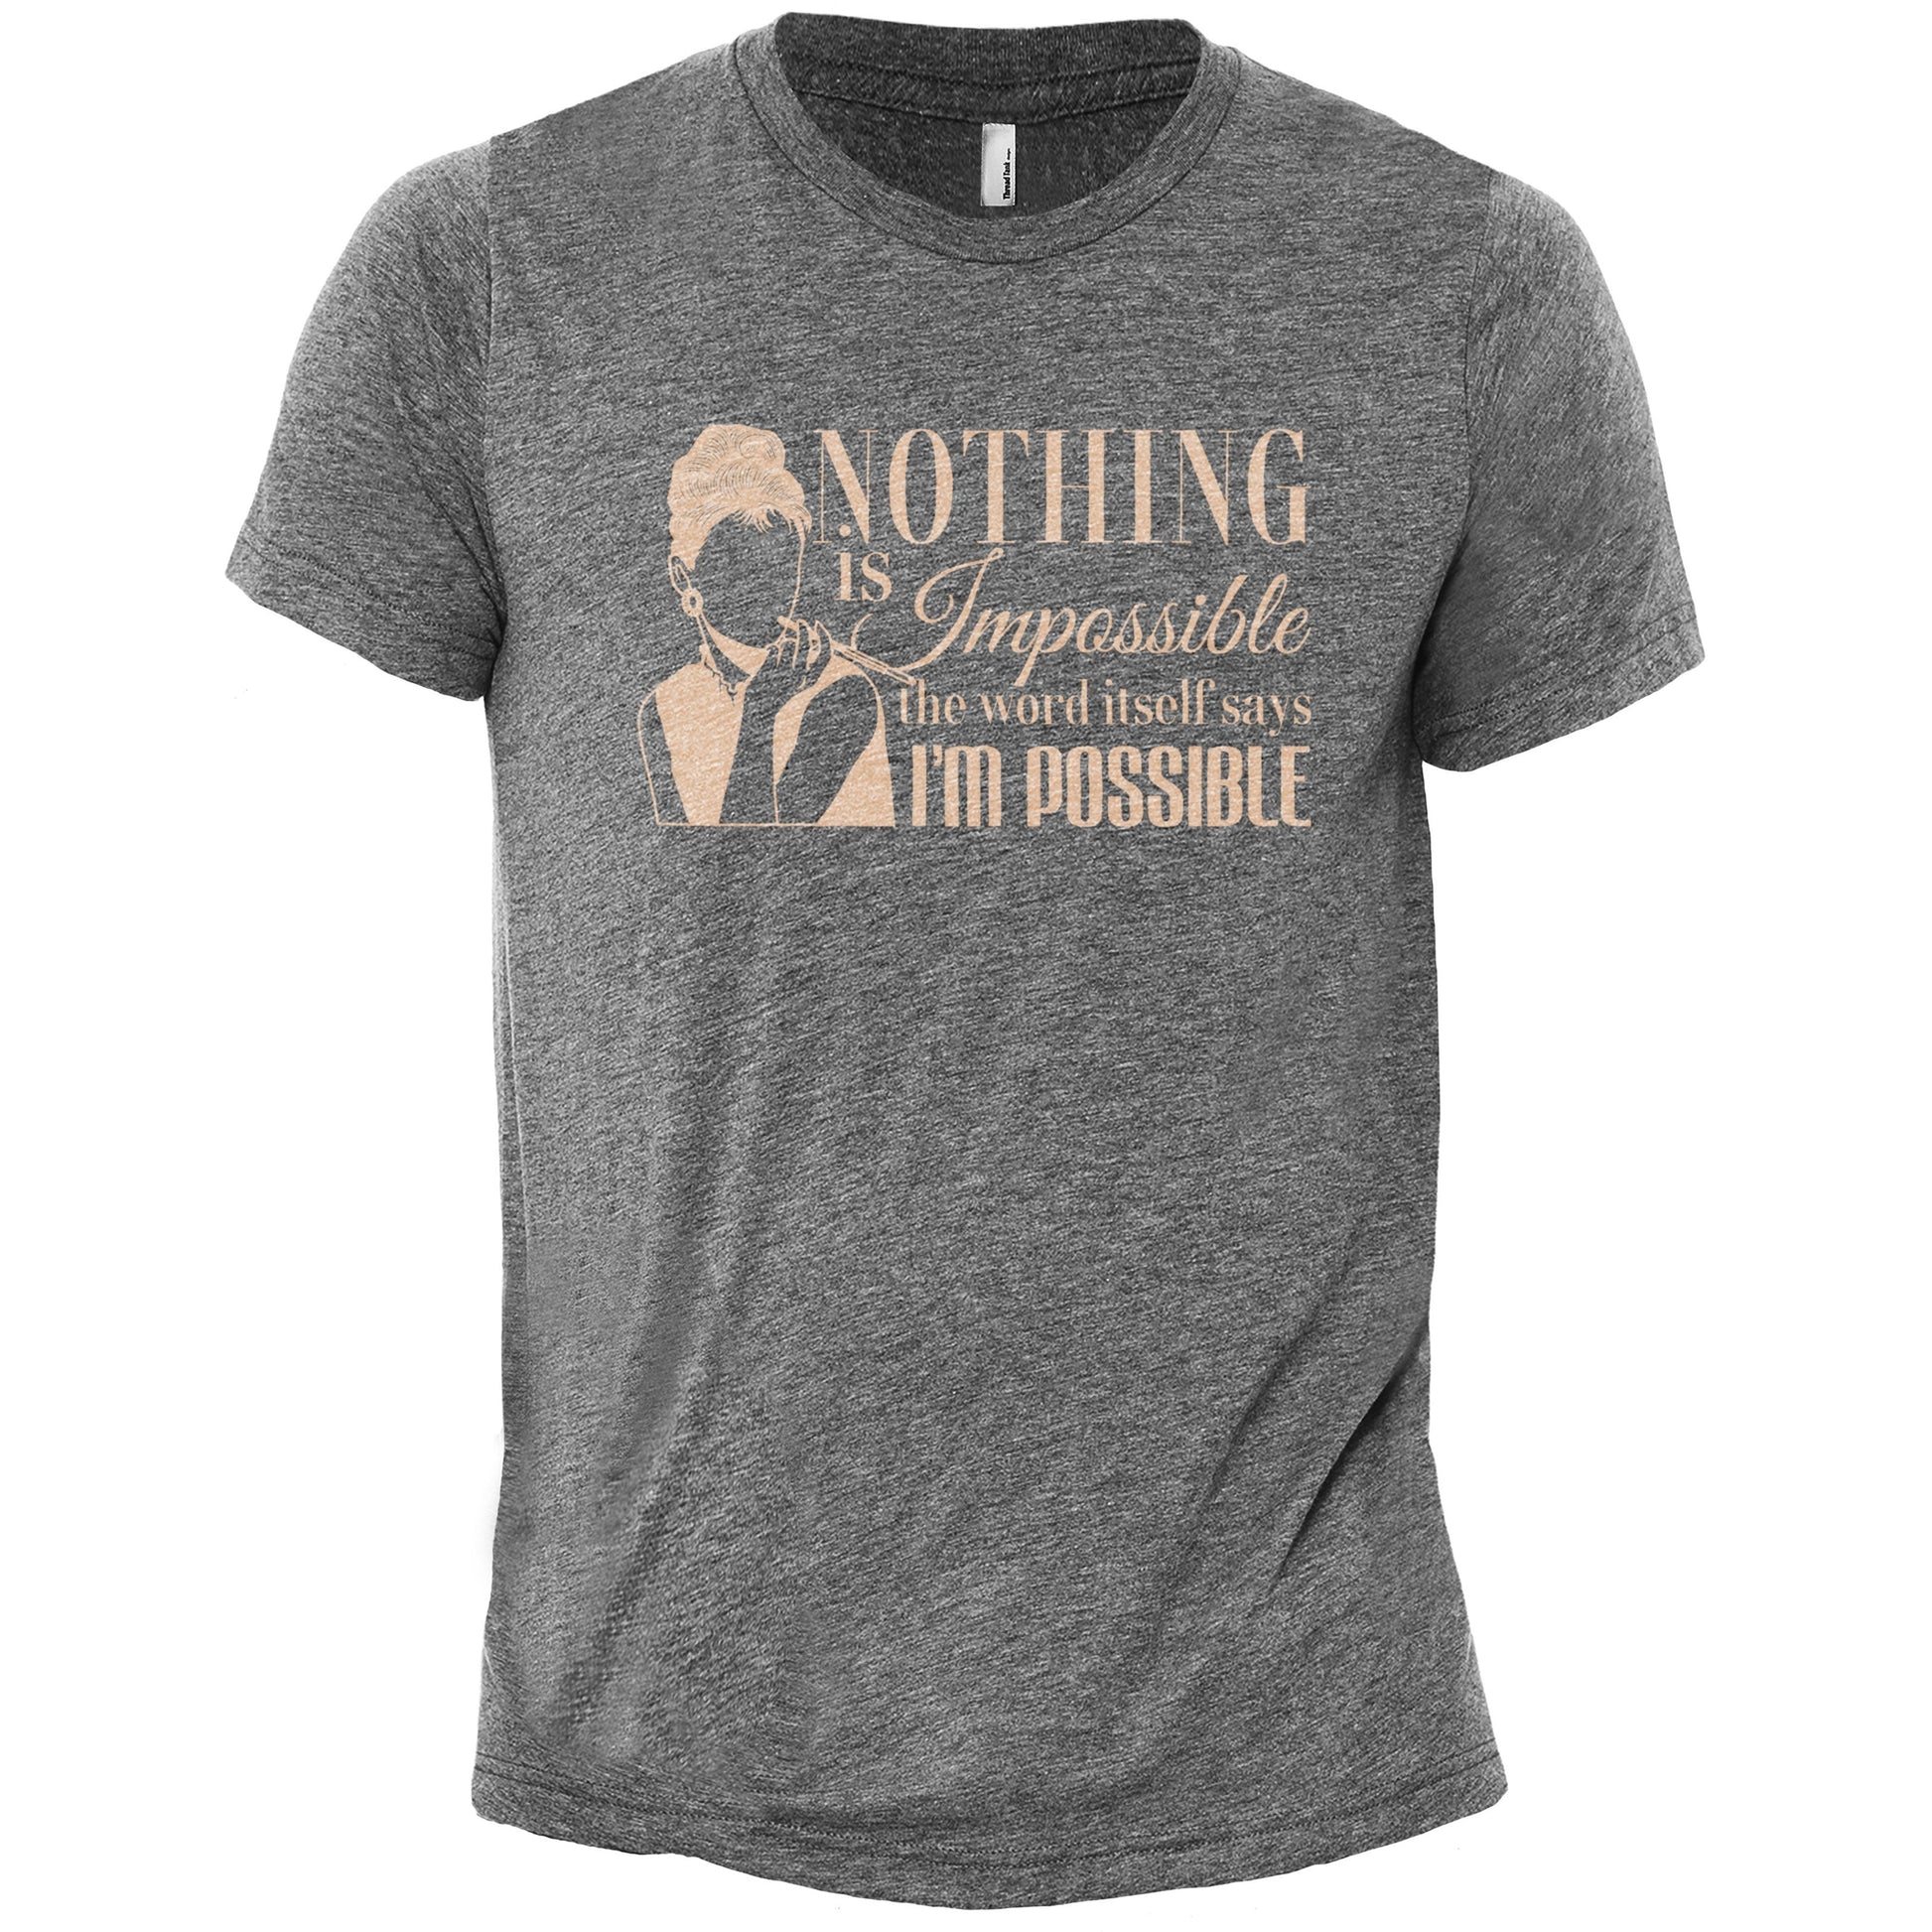 Nothing is impossible - threadtank | stories you can wear